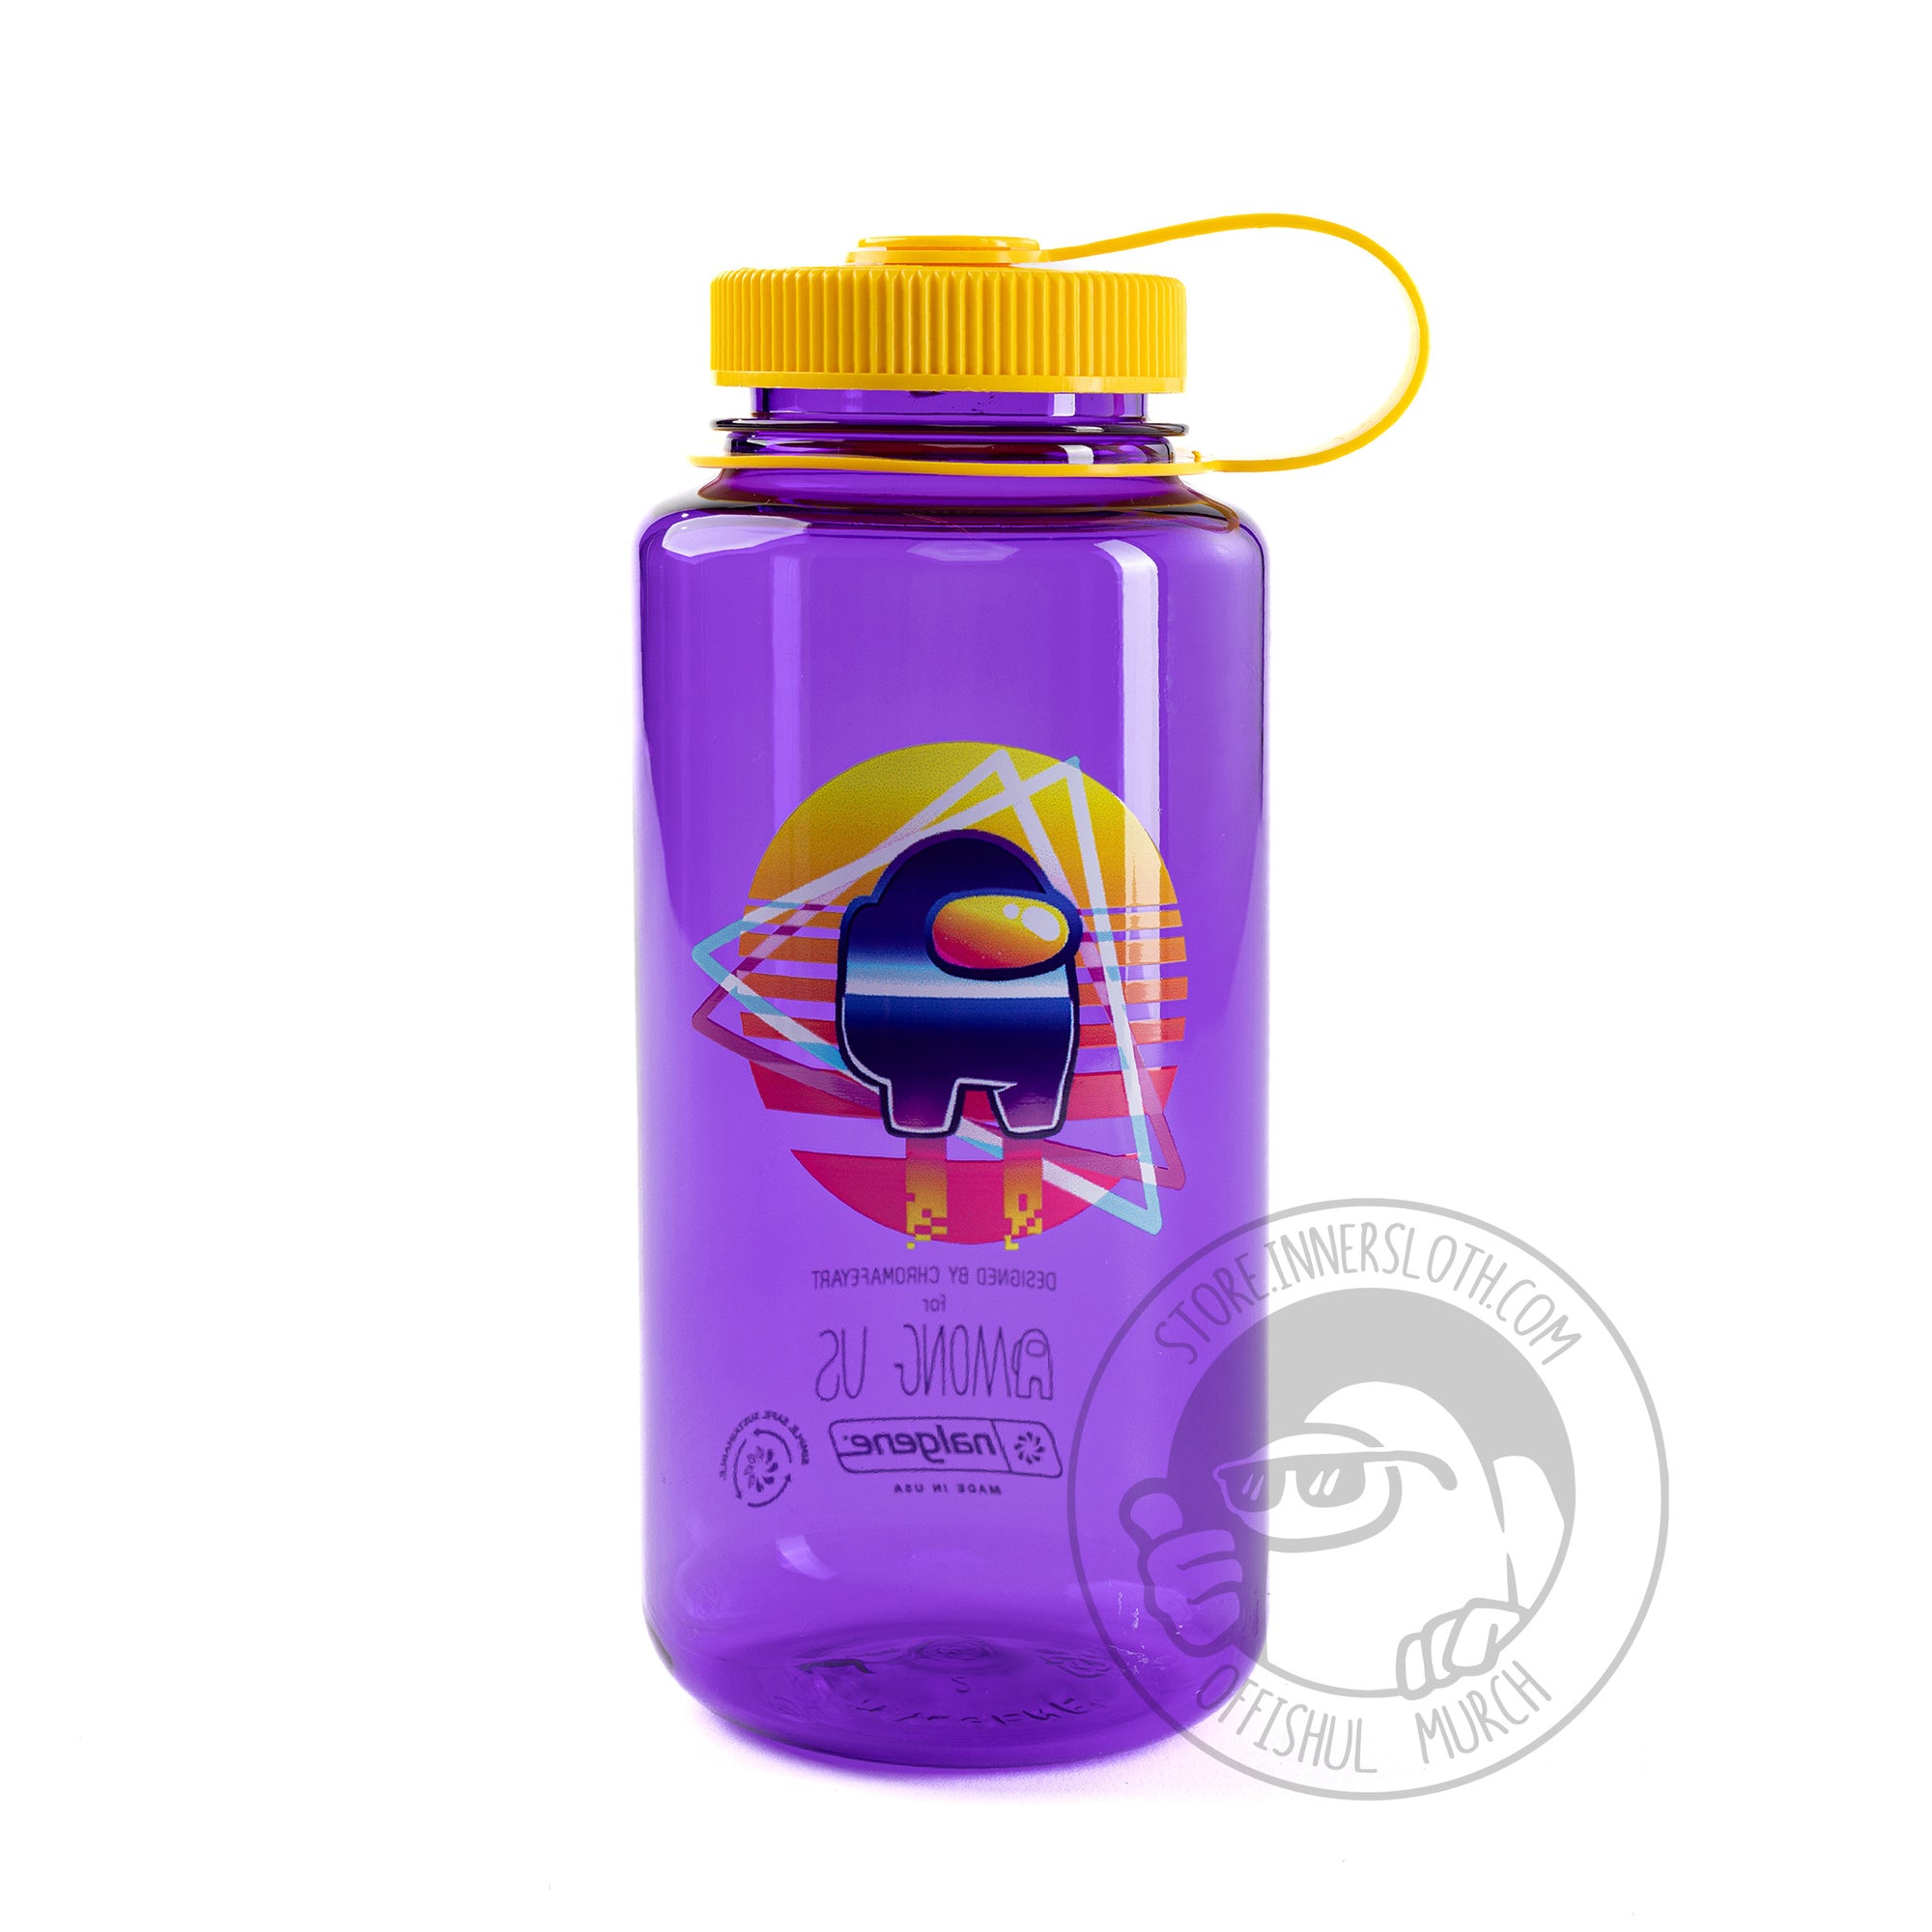 A photo of a Vaporwave themed iridescent blue-to-purple Crewmate on a traslucent purple nalgene waterbottle. The Crewmate is standing in front of two neon pink triangles against an ombre graphic yellow to pink sunset. Artwork by ChromaFeyArt